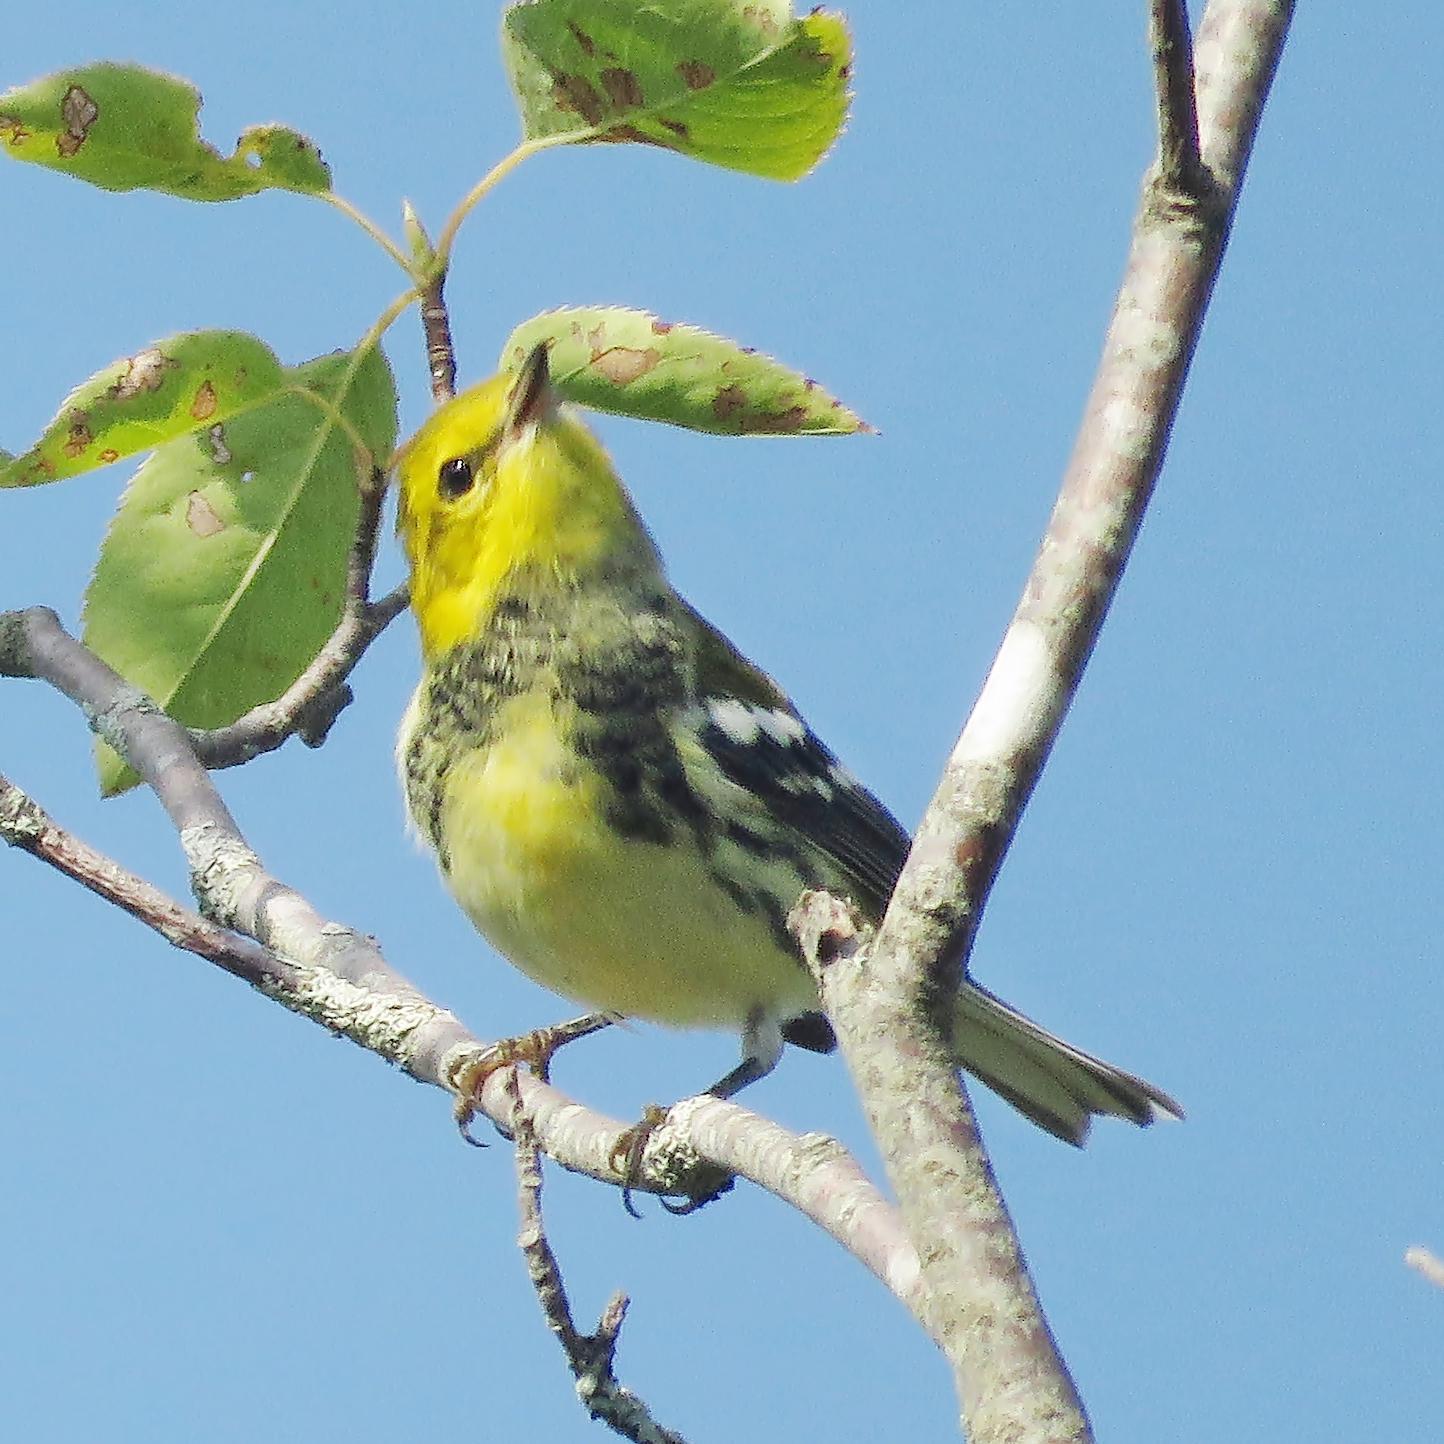 Black-throated Green Warbler Photo by Bob Neugebauer